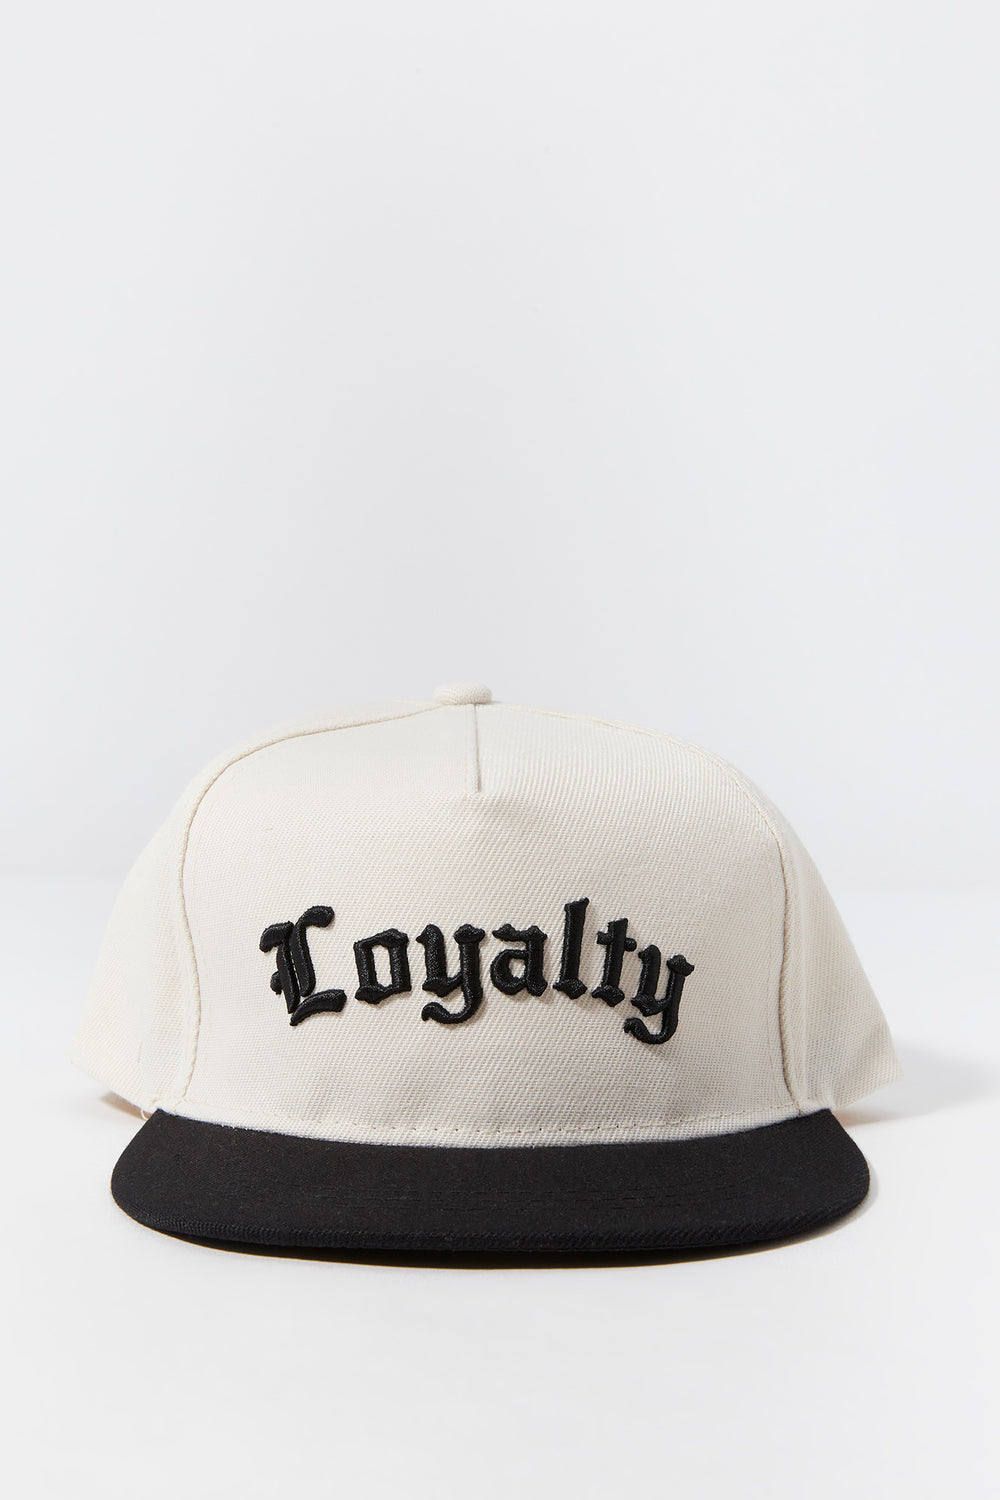 Loyalty Embroidered Snapback Hat Loyalty Embroidered Snapback Hat 3